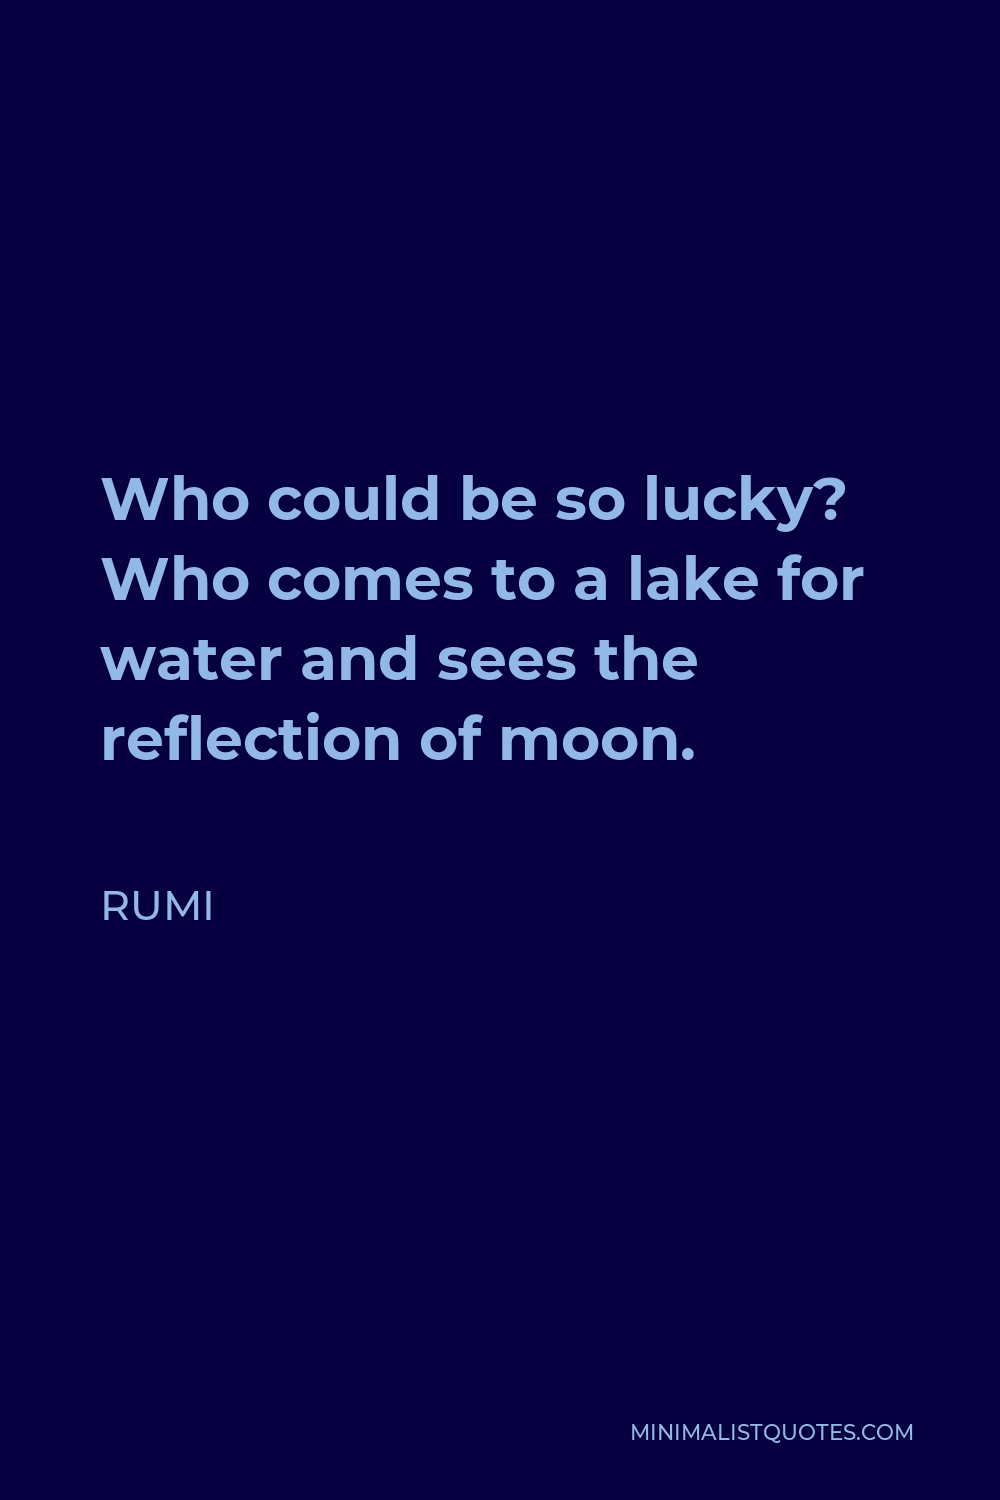 Rumi Quote - Who could be so lucky? Who comes to a lake for water and sees the reflection of moon.